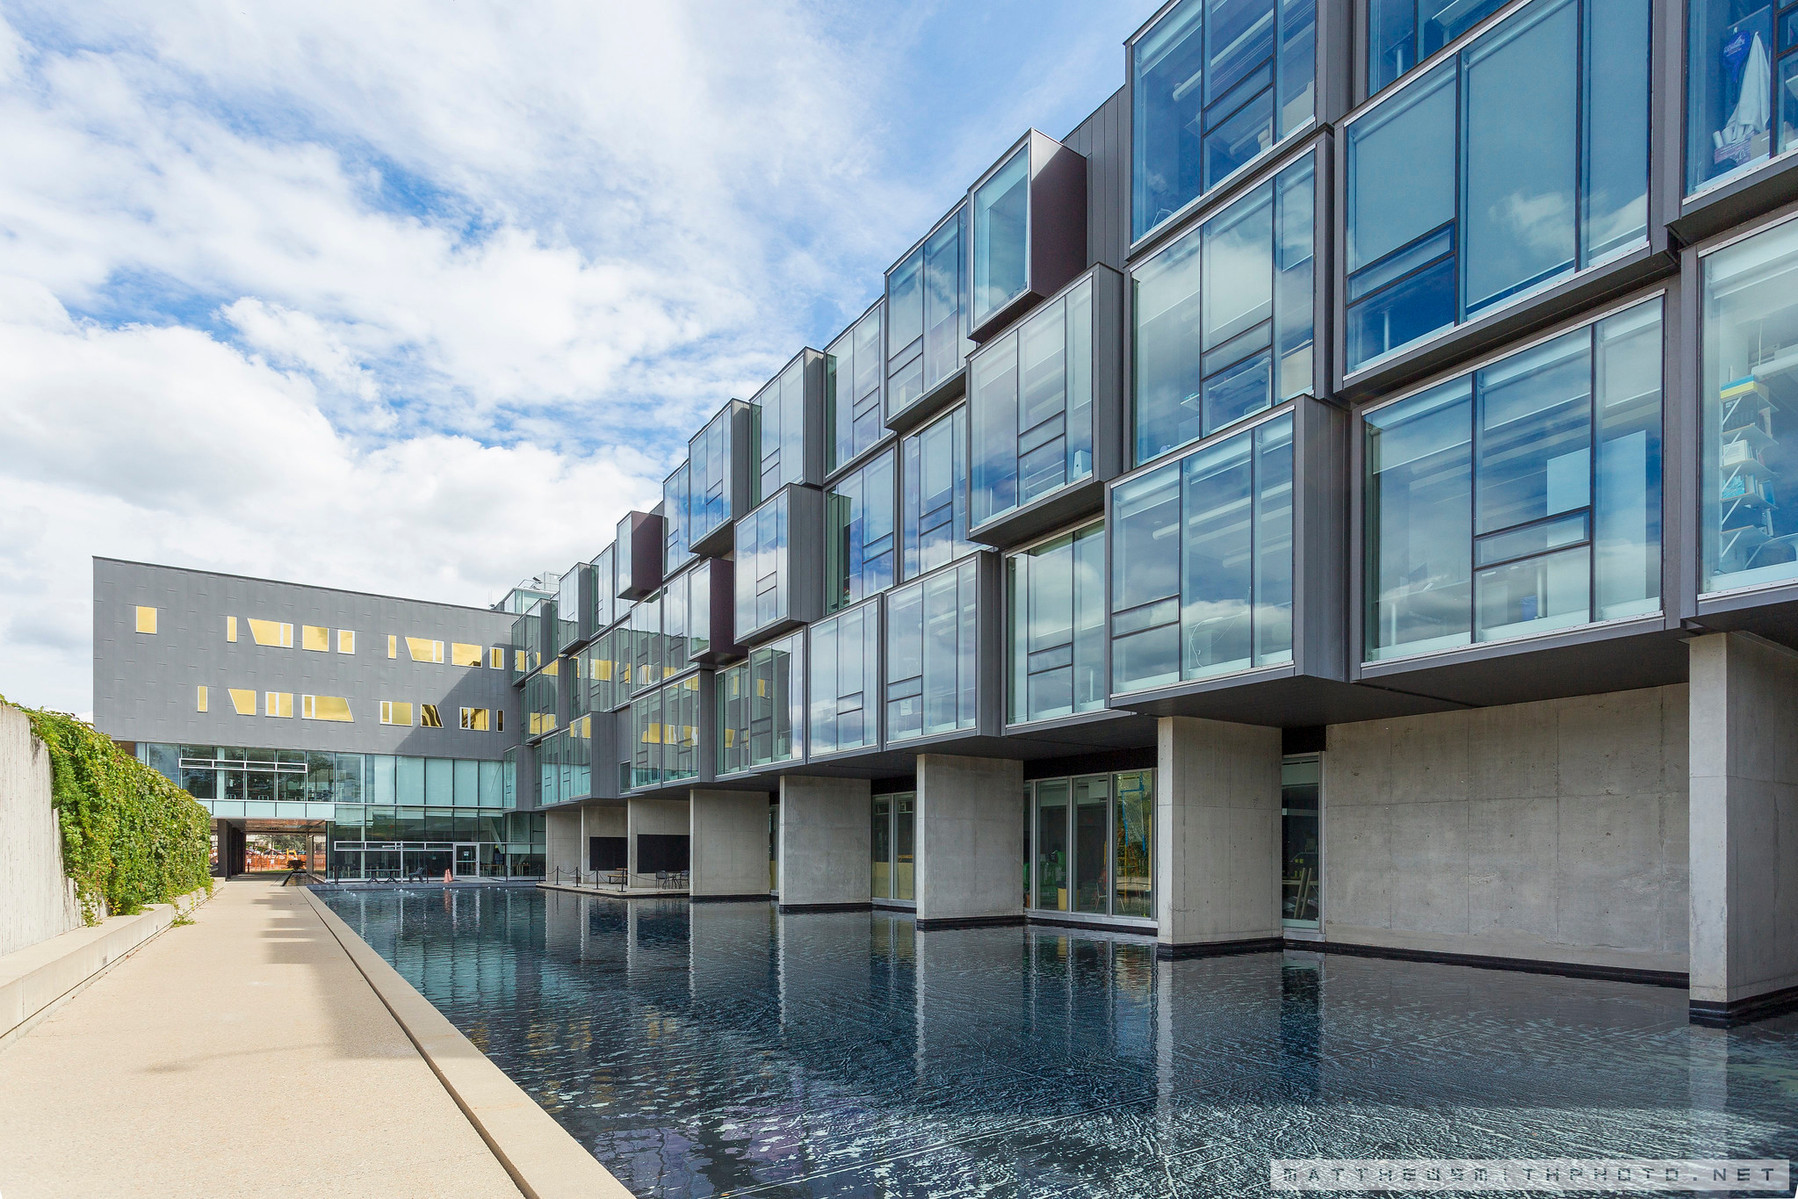 Perimeter Institute for Theoretical Physics in Waterloo architecture photography.